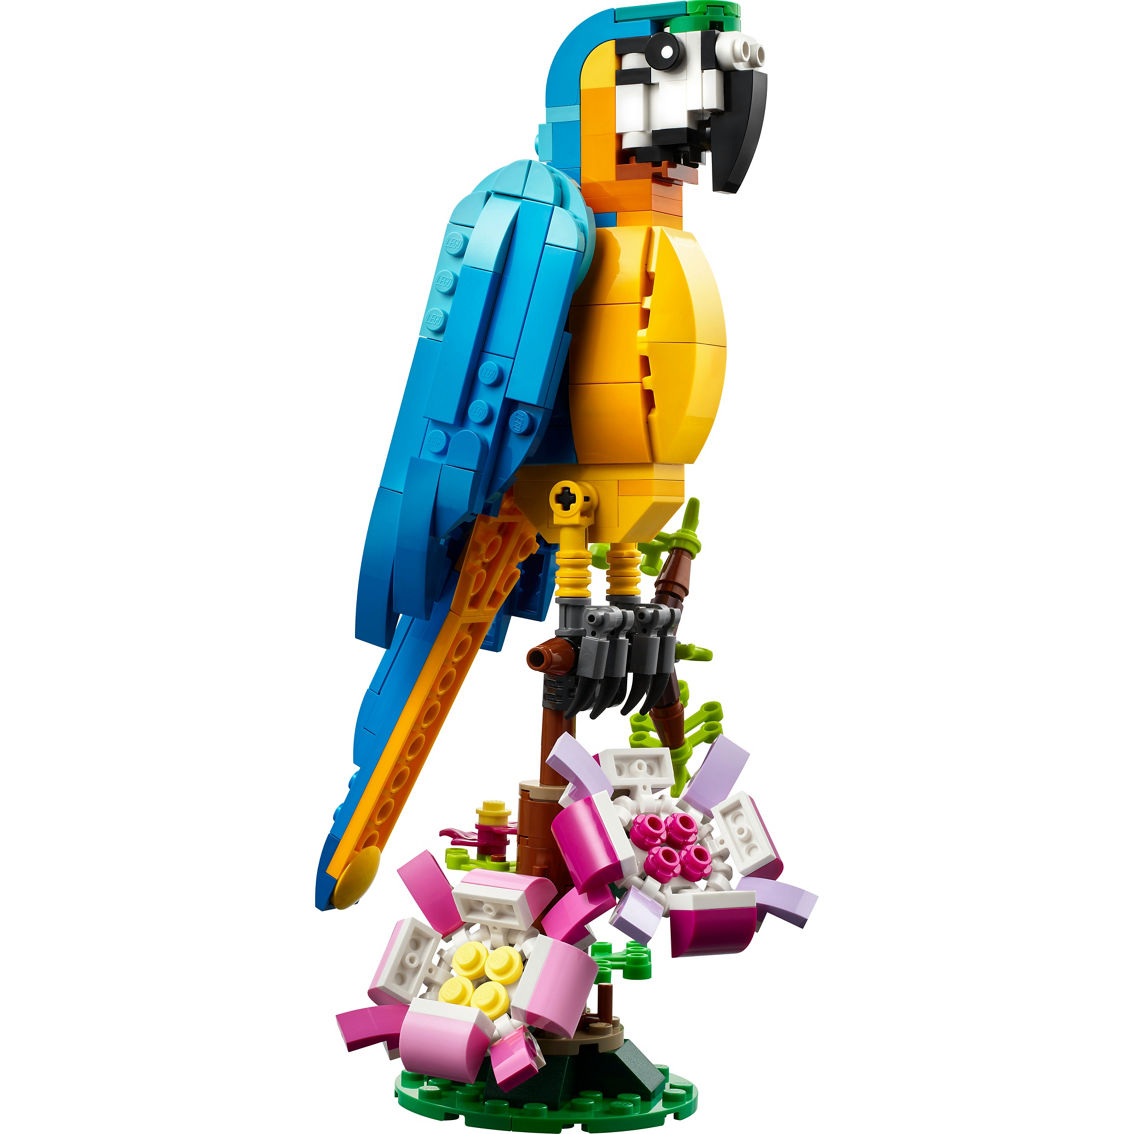 LEGO Creator Exotic Parrot Toy 31136 - Image 4 of 10